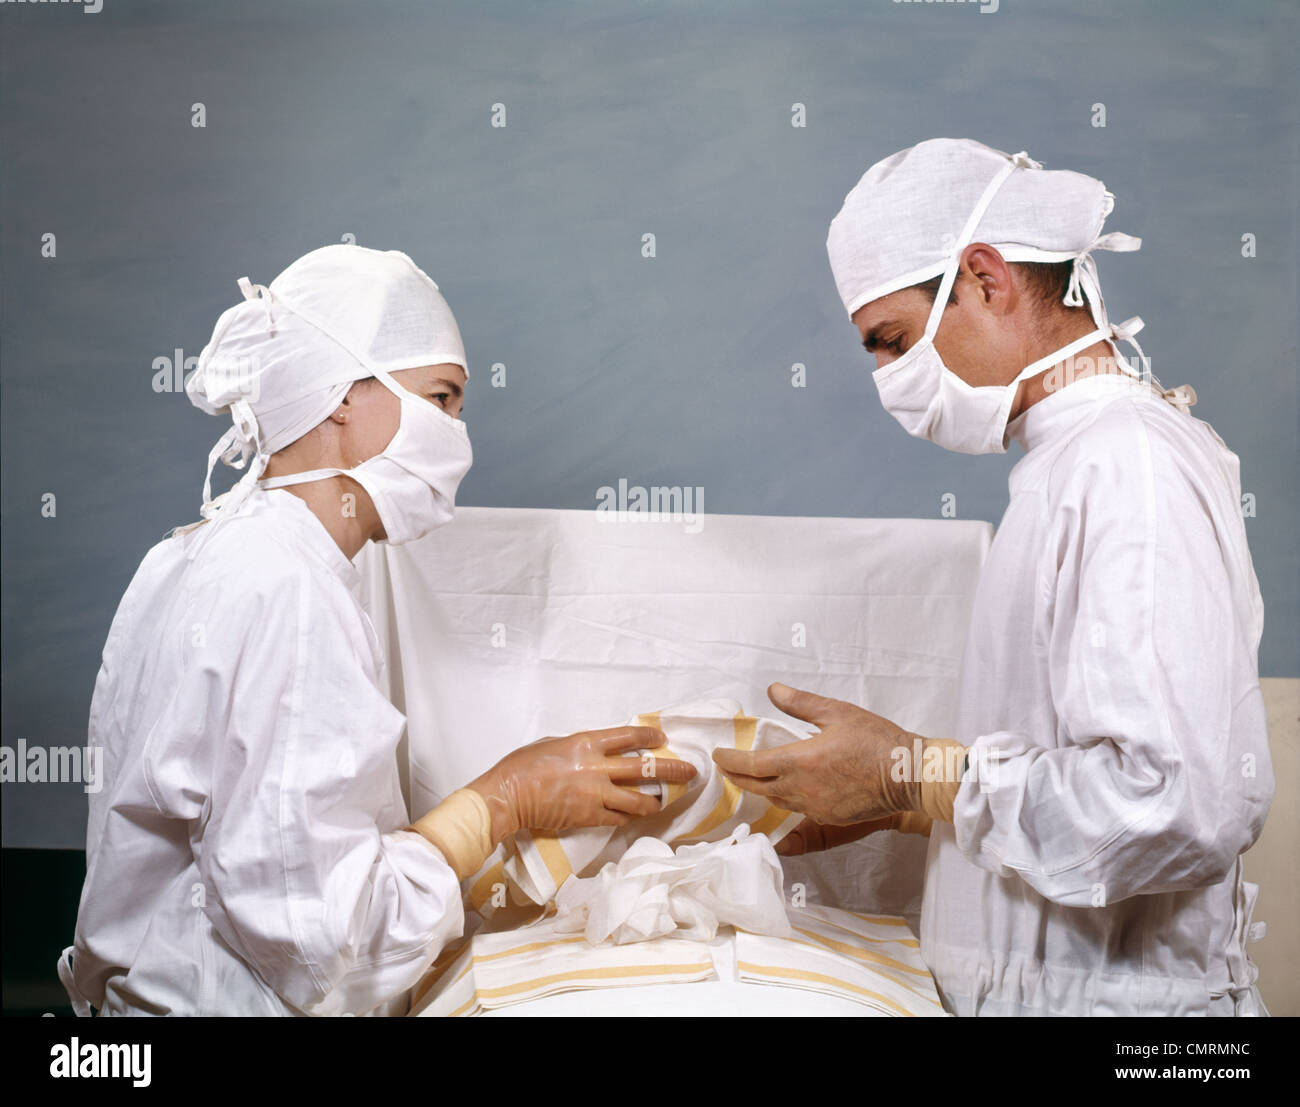 1950s 1960s DOCTOR & NURSE IN SURGERY OPERATION OPERATING STERILE SURGICAL WHITE CAPS GOWNS MASKS RETRO VINTAGE Stock Photo